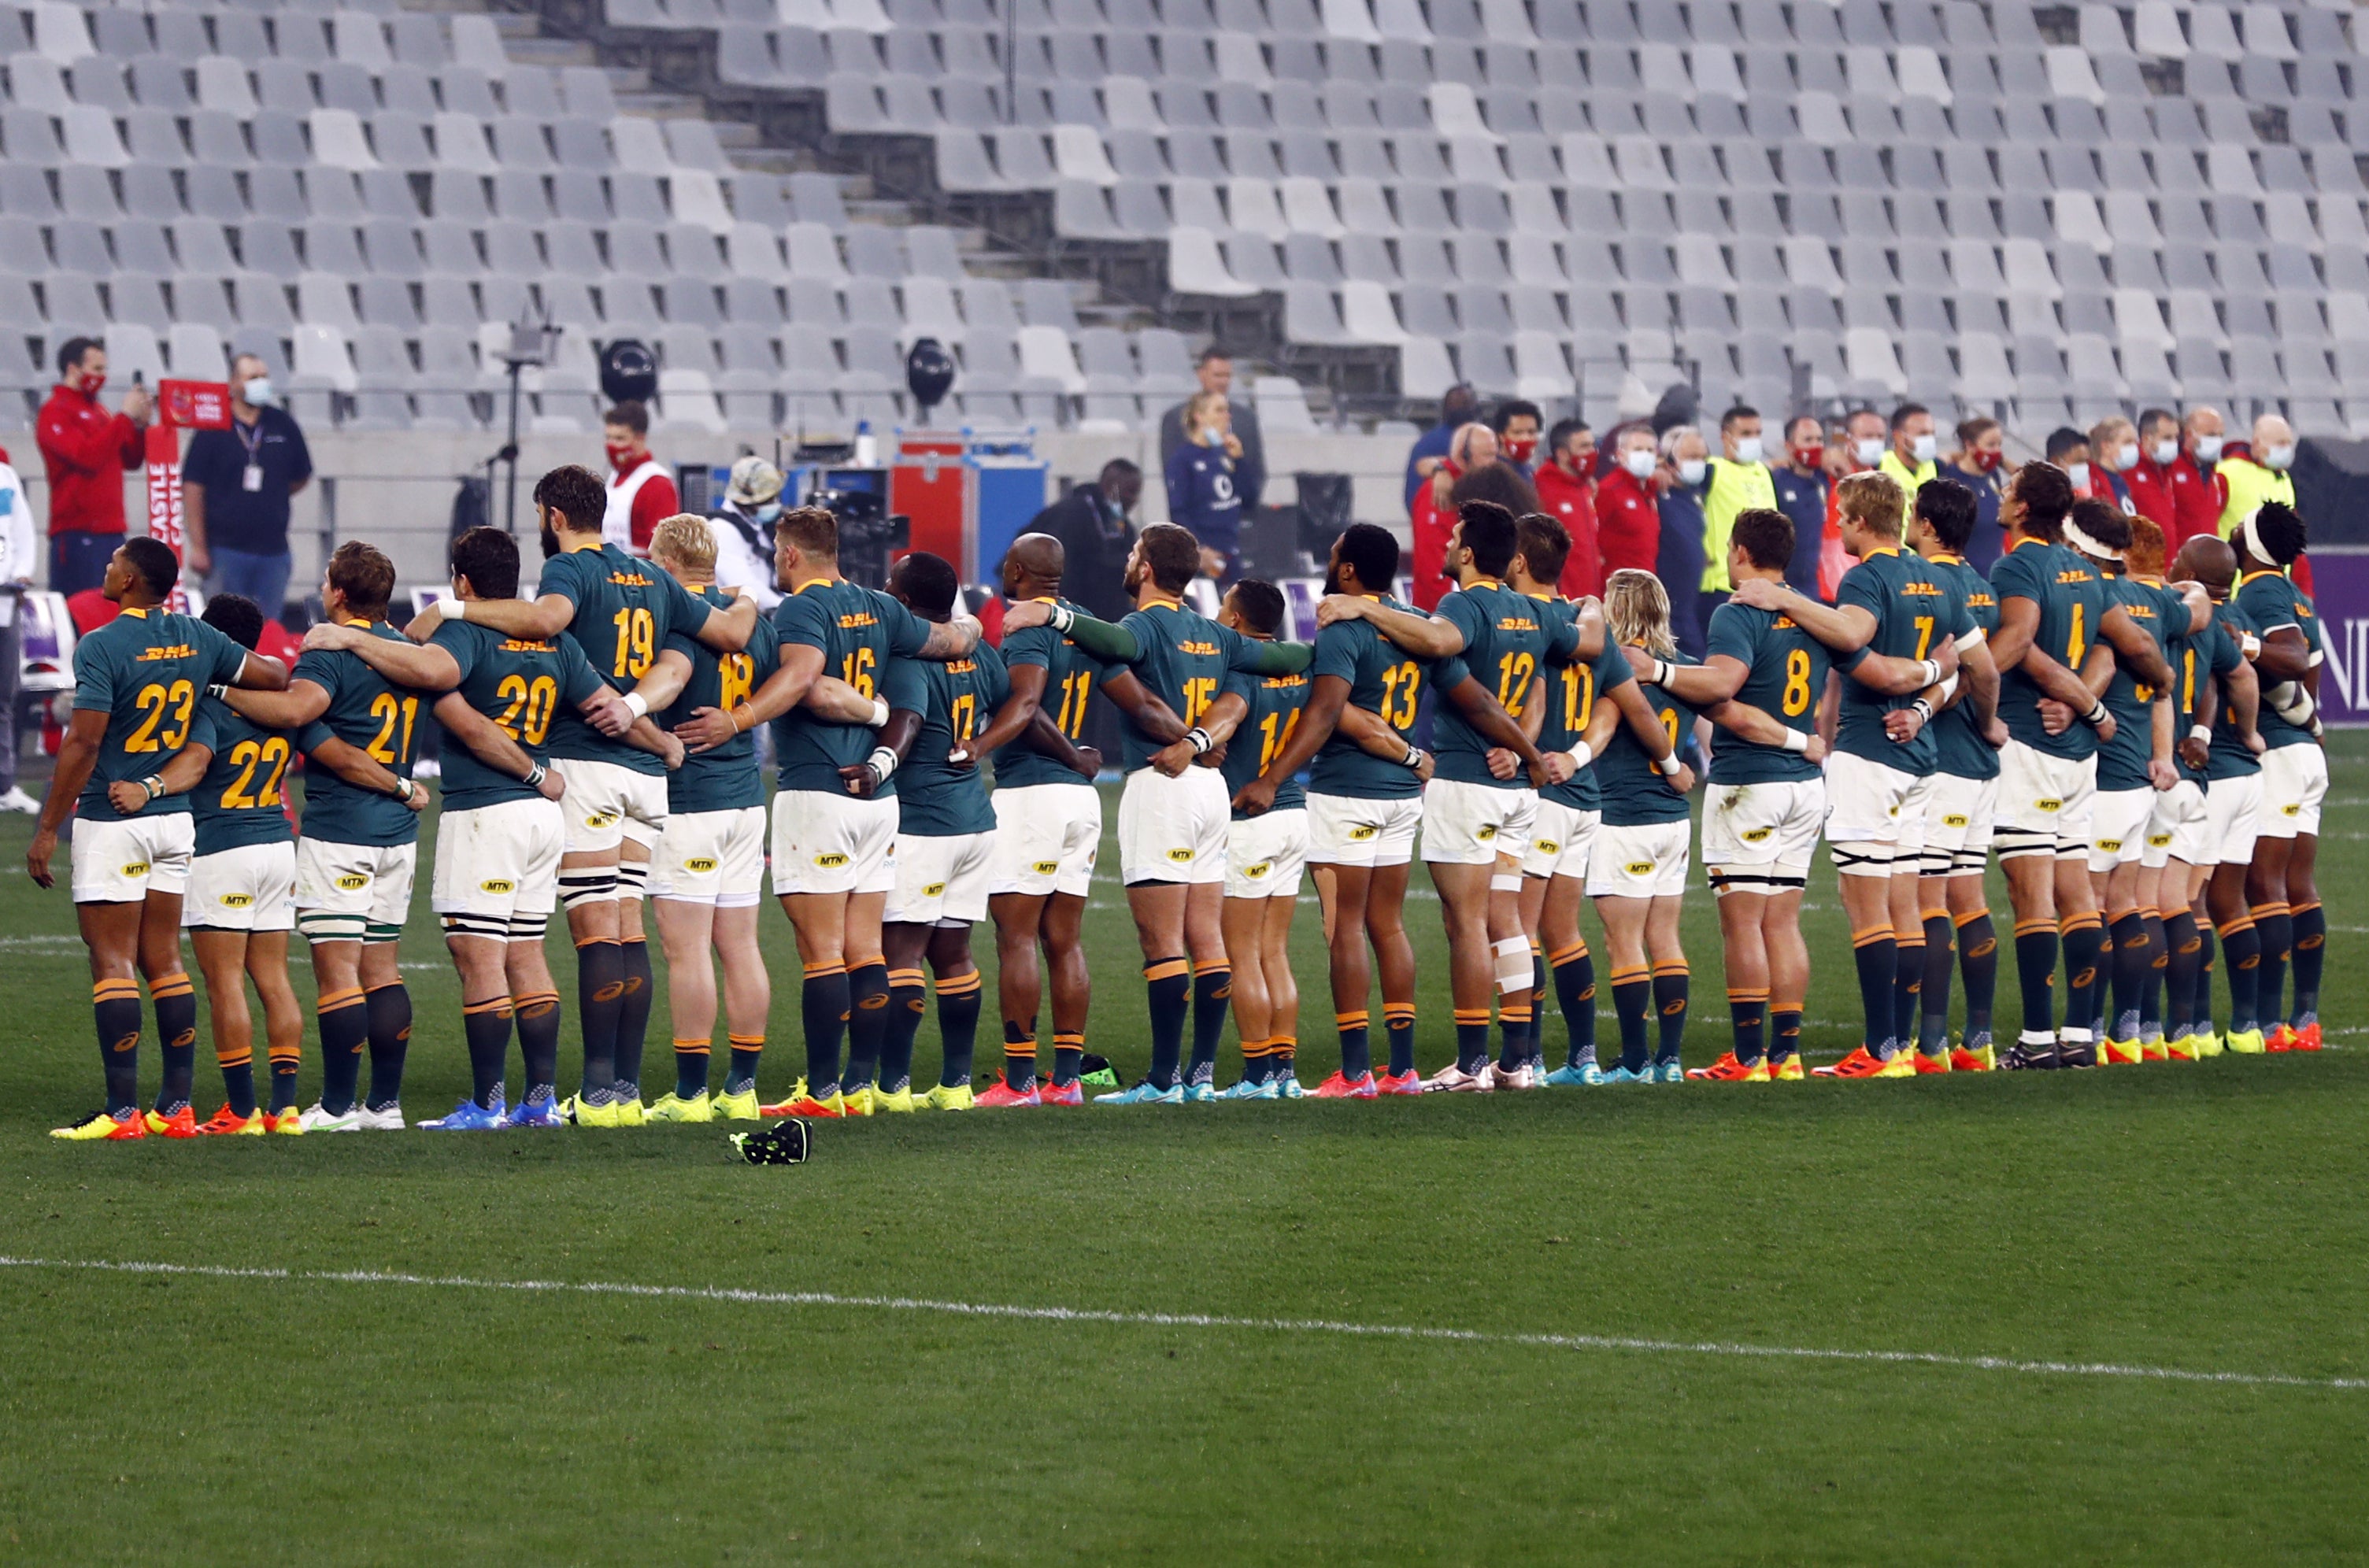 South Africa have been accused of playing boring rugby (Steve Haag/PA)